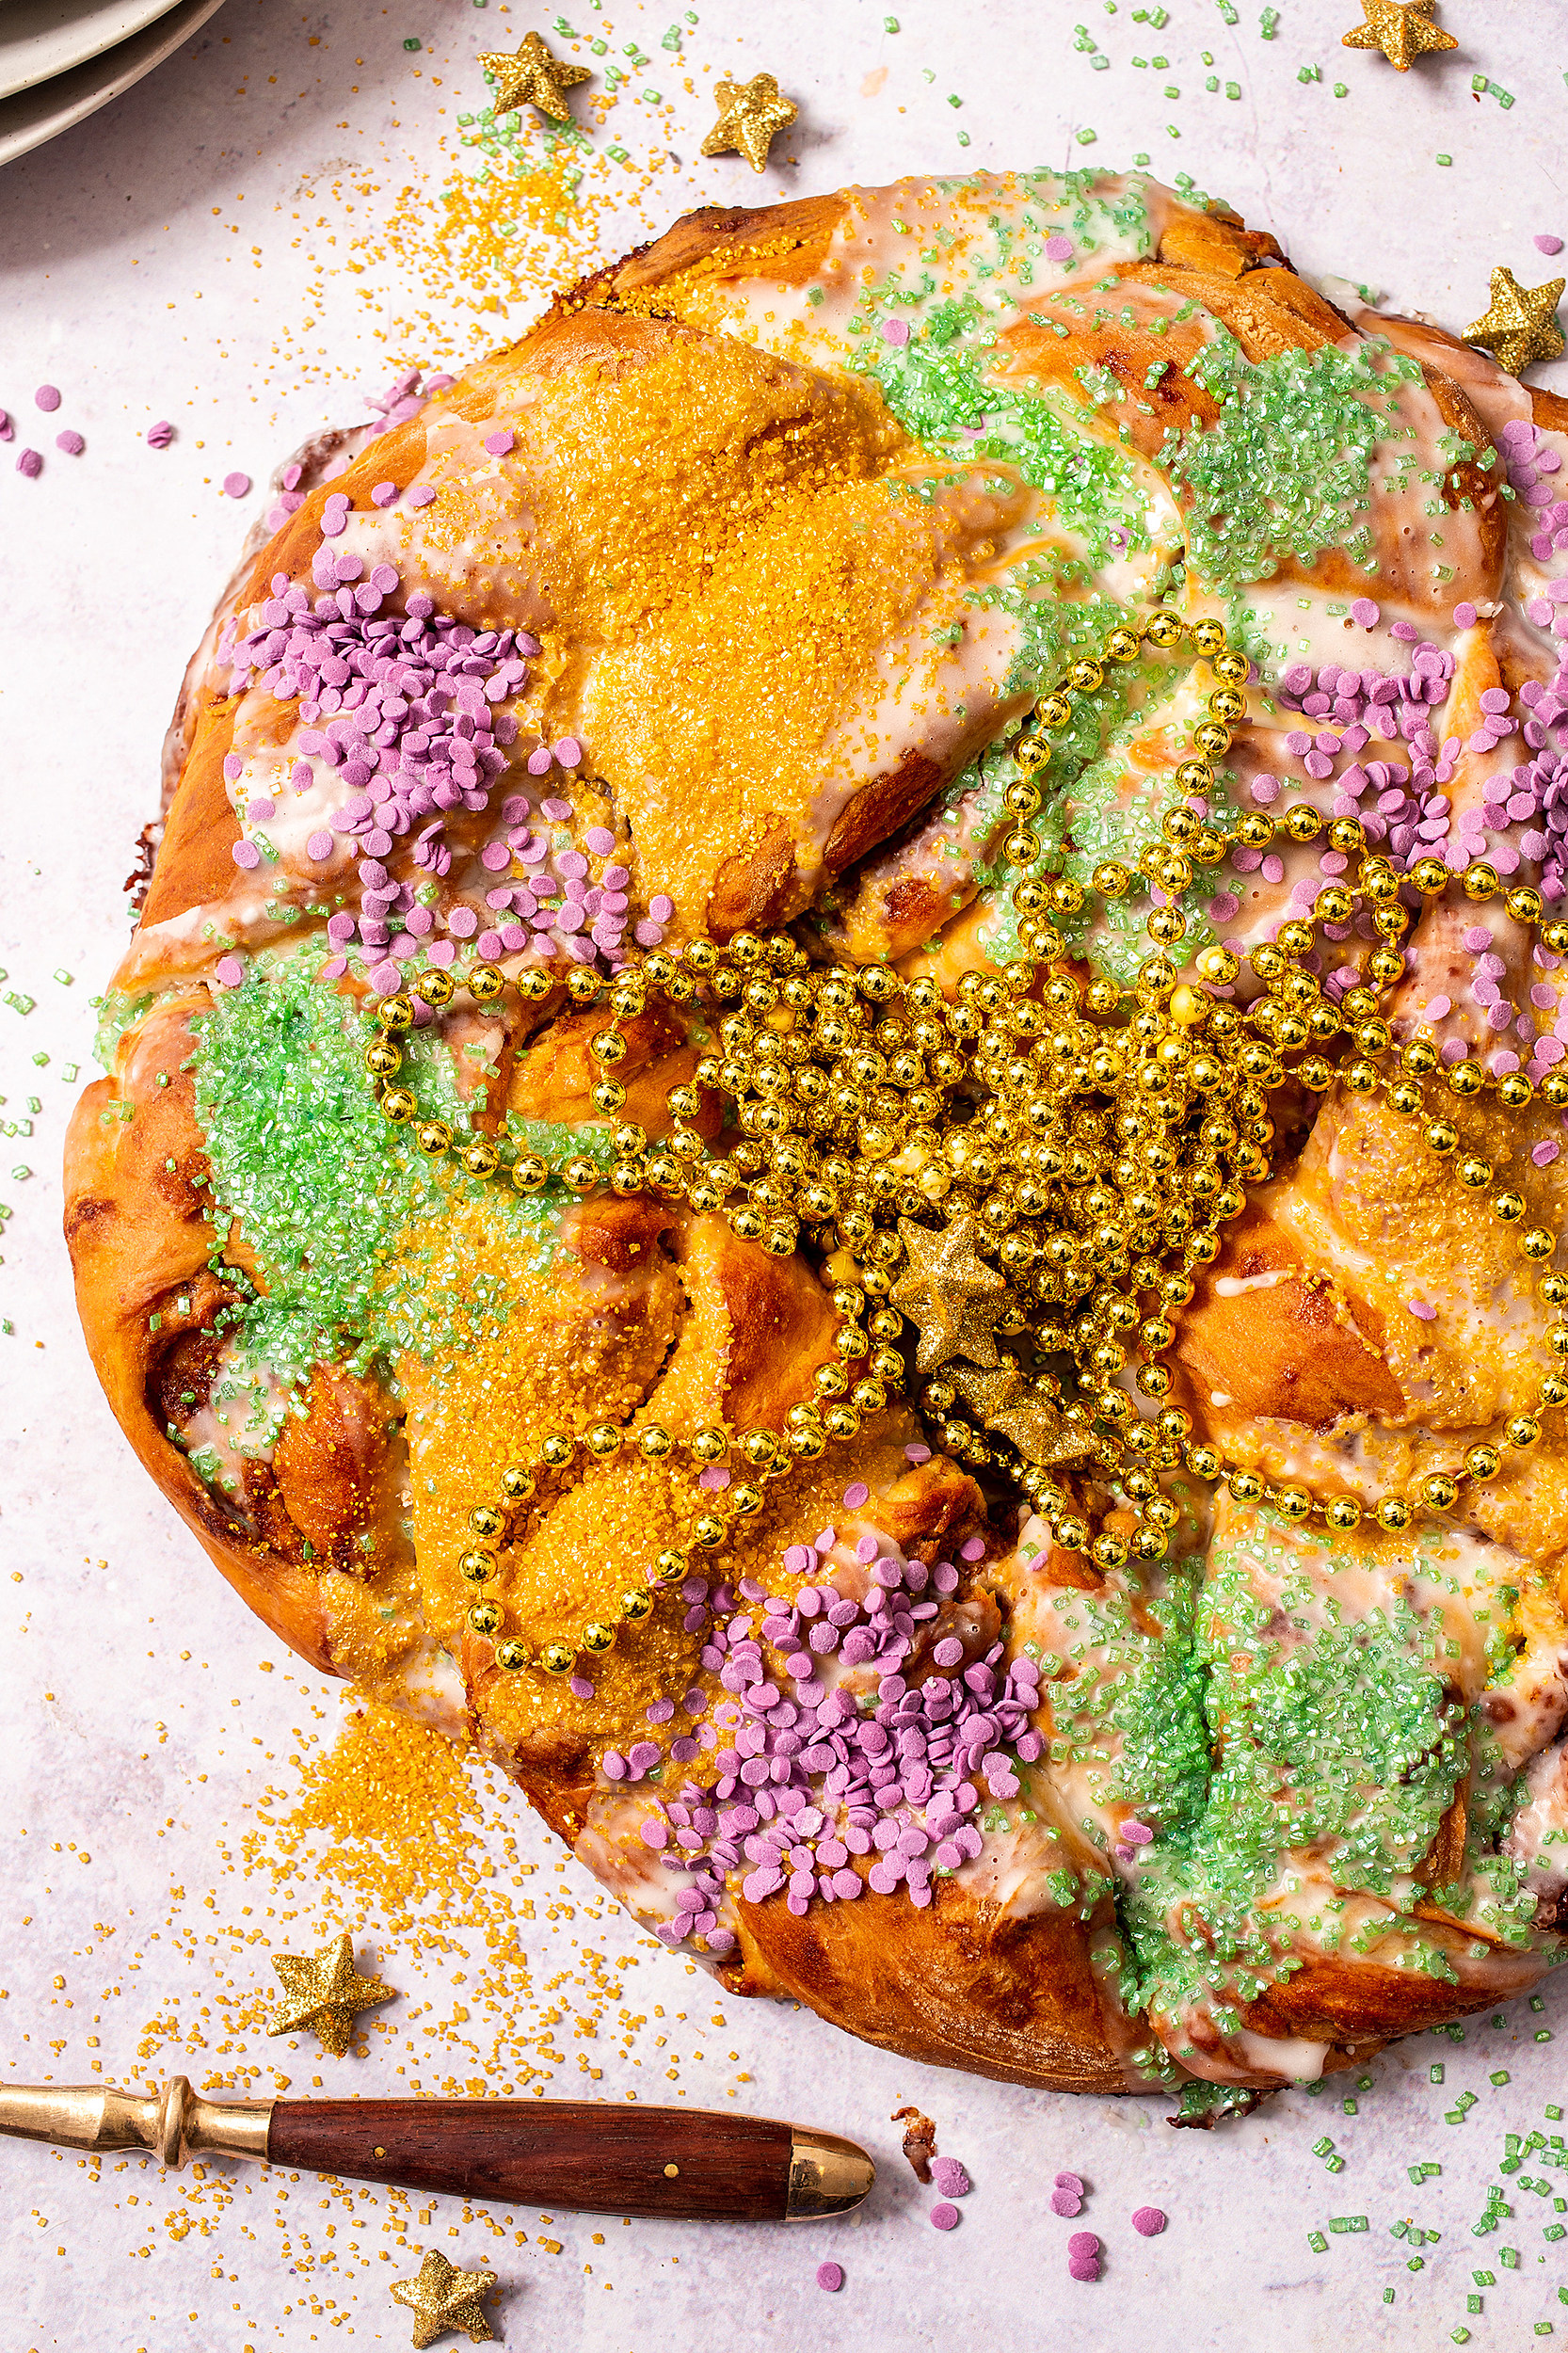 Let's Bake a “Mardi Gras King Cake” from a Box | beyondgumbo